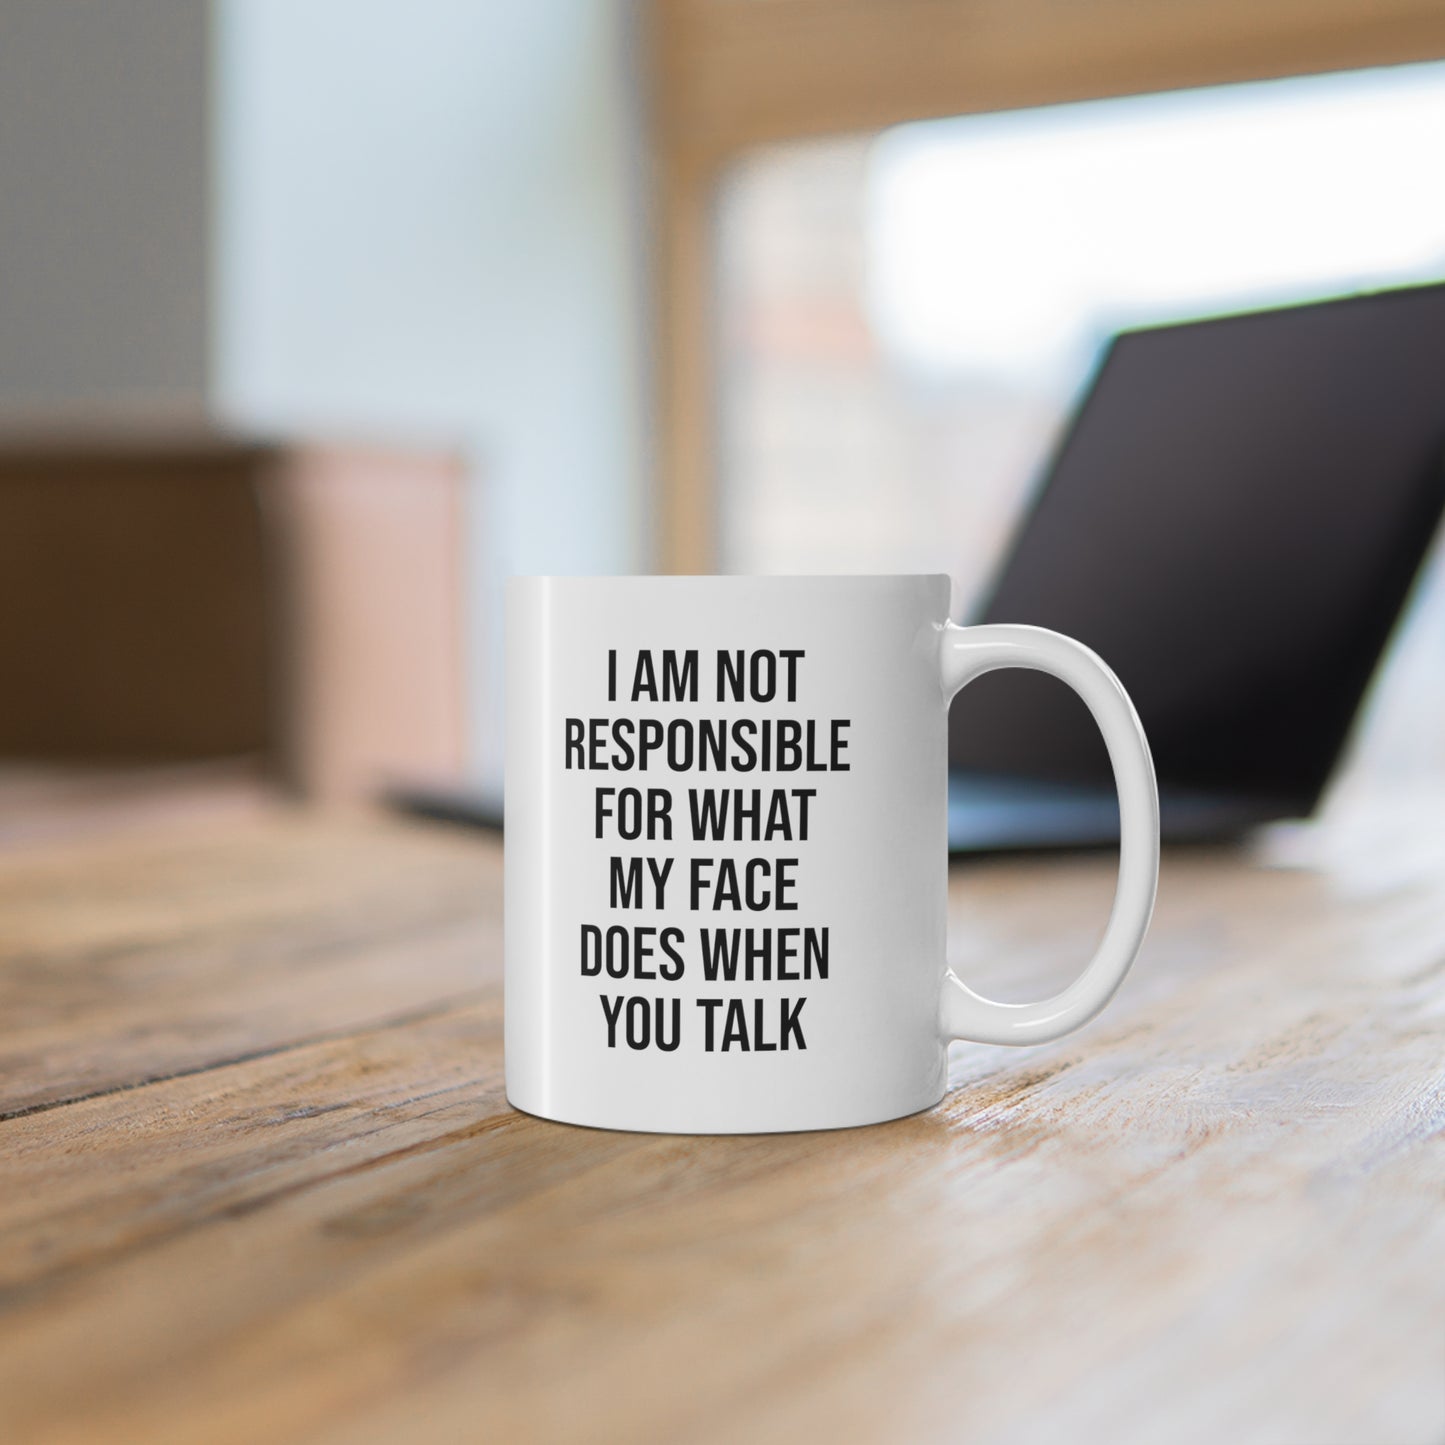 11oz ceramic mug with quote I am not responsible for what my face does when you talk